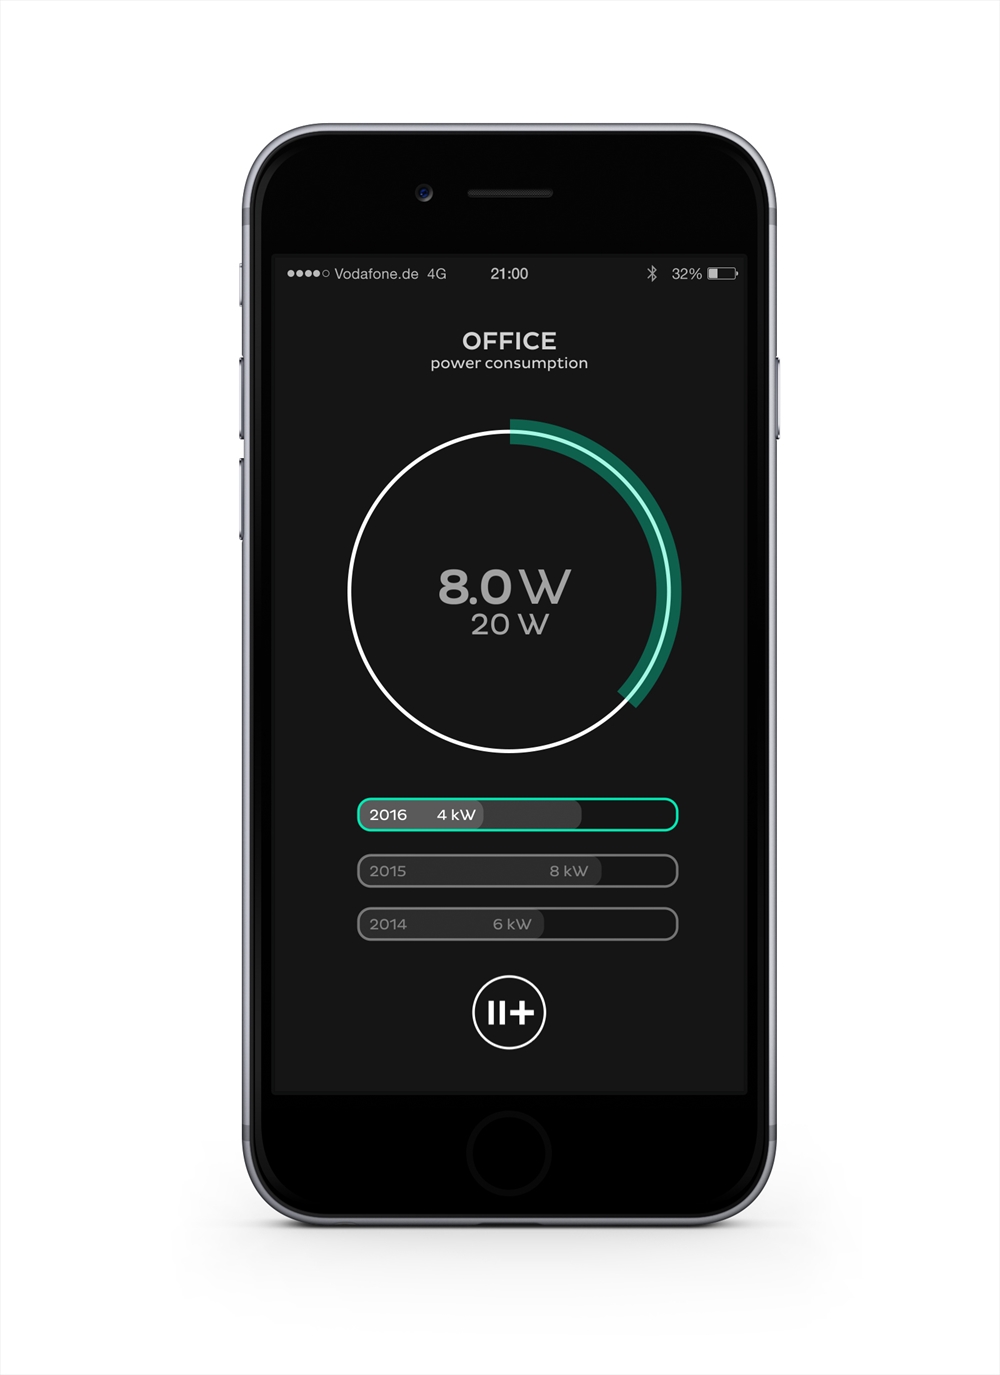 Archisearch HOLY TRINITY UNVEILS AN INTELLIGENT APP-CONTROLLED LIGHTING SYSTEM ON KICKSTARTER